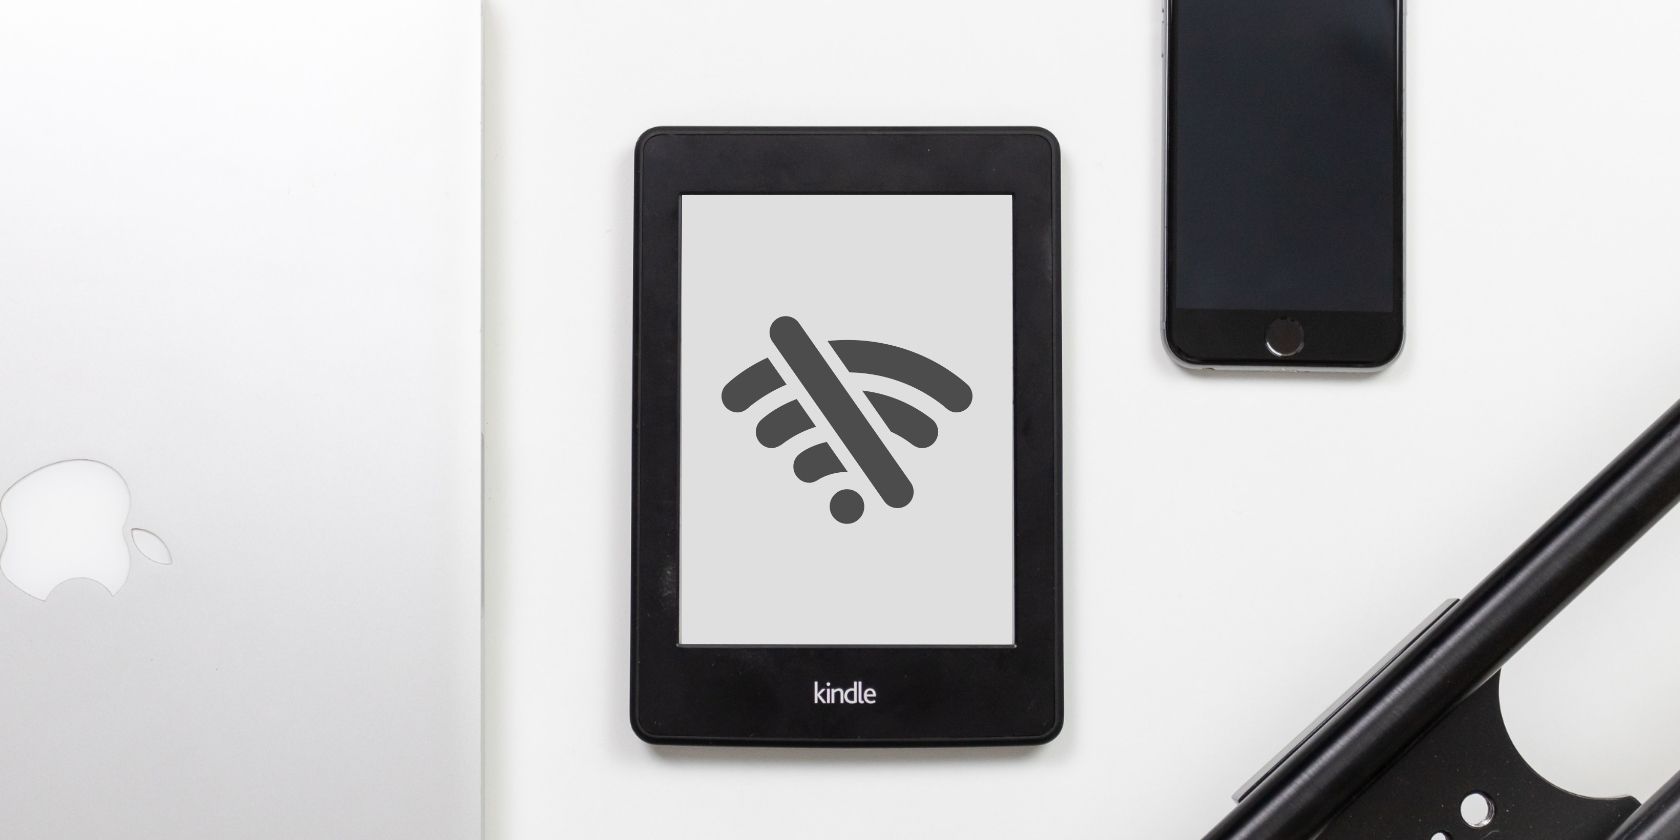 Kindle on a desk with the no Wi-Fi symbol.